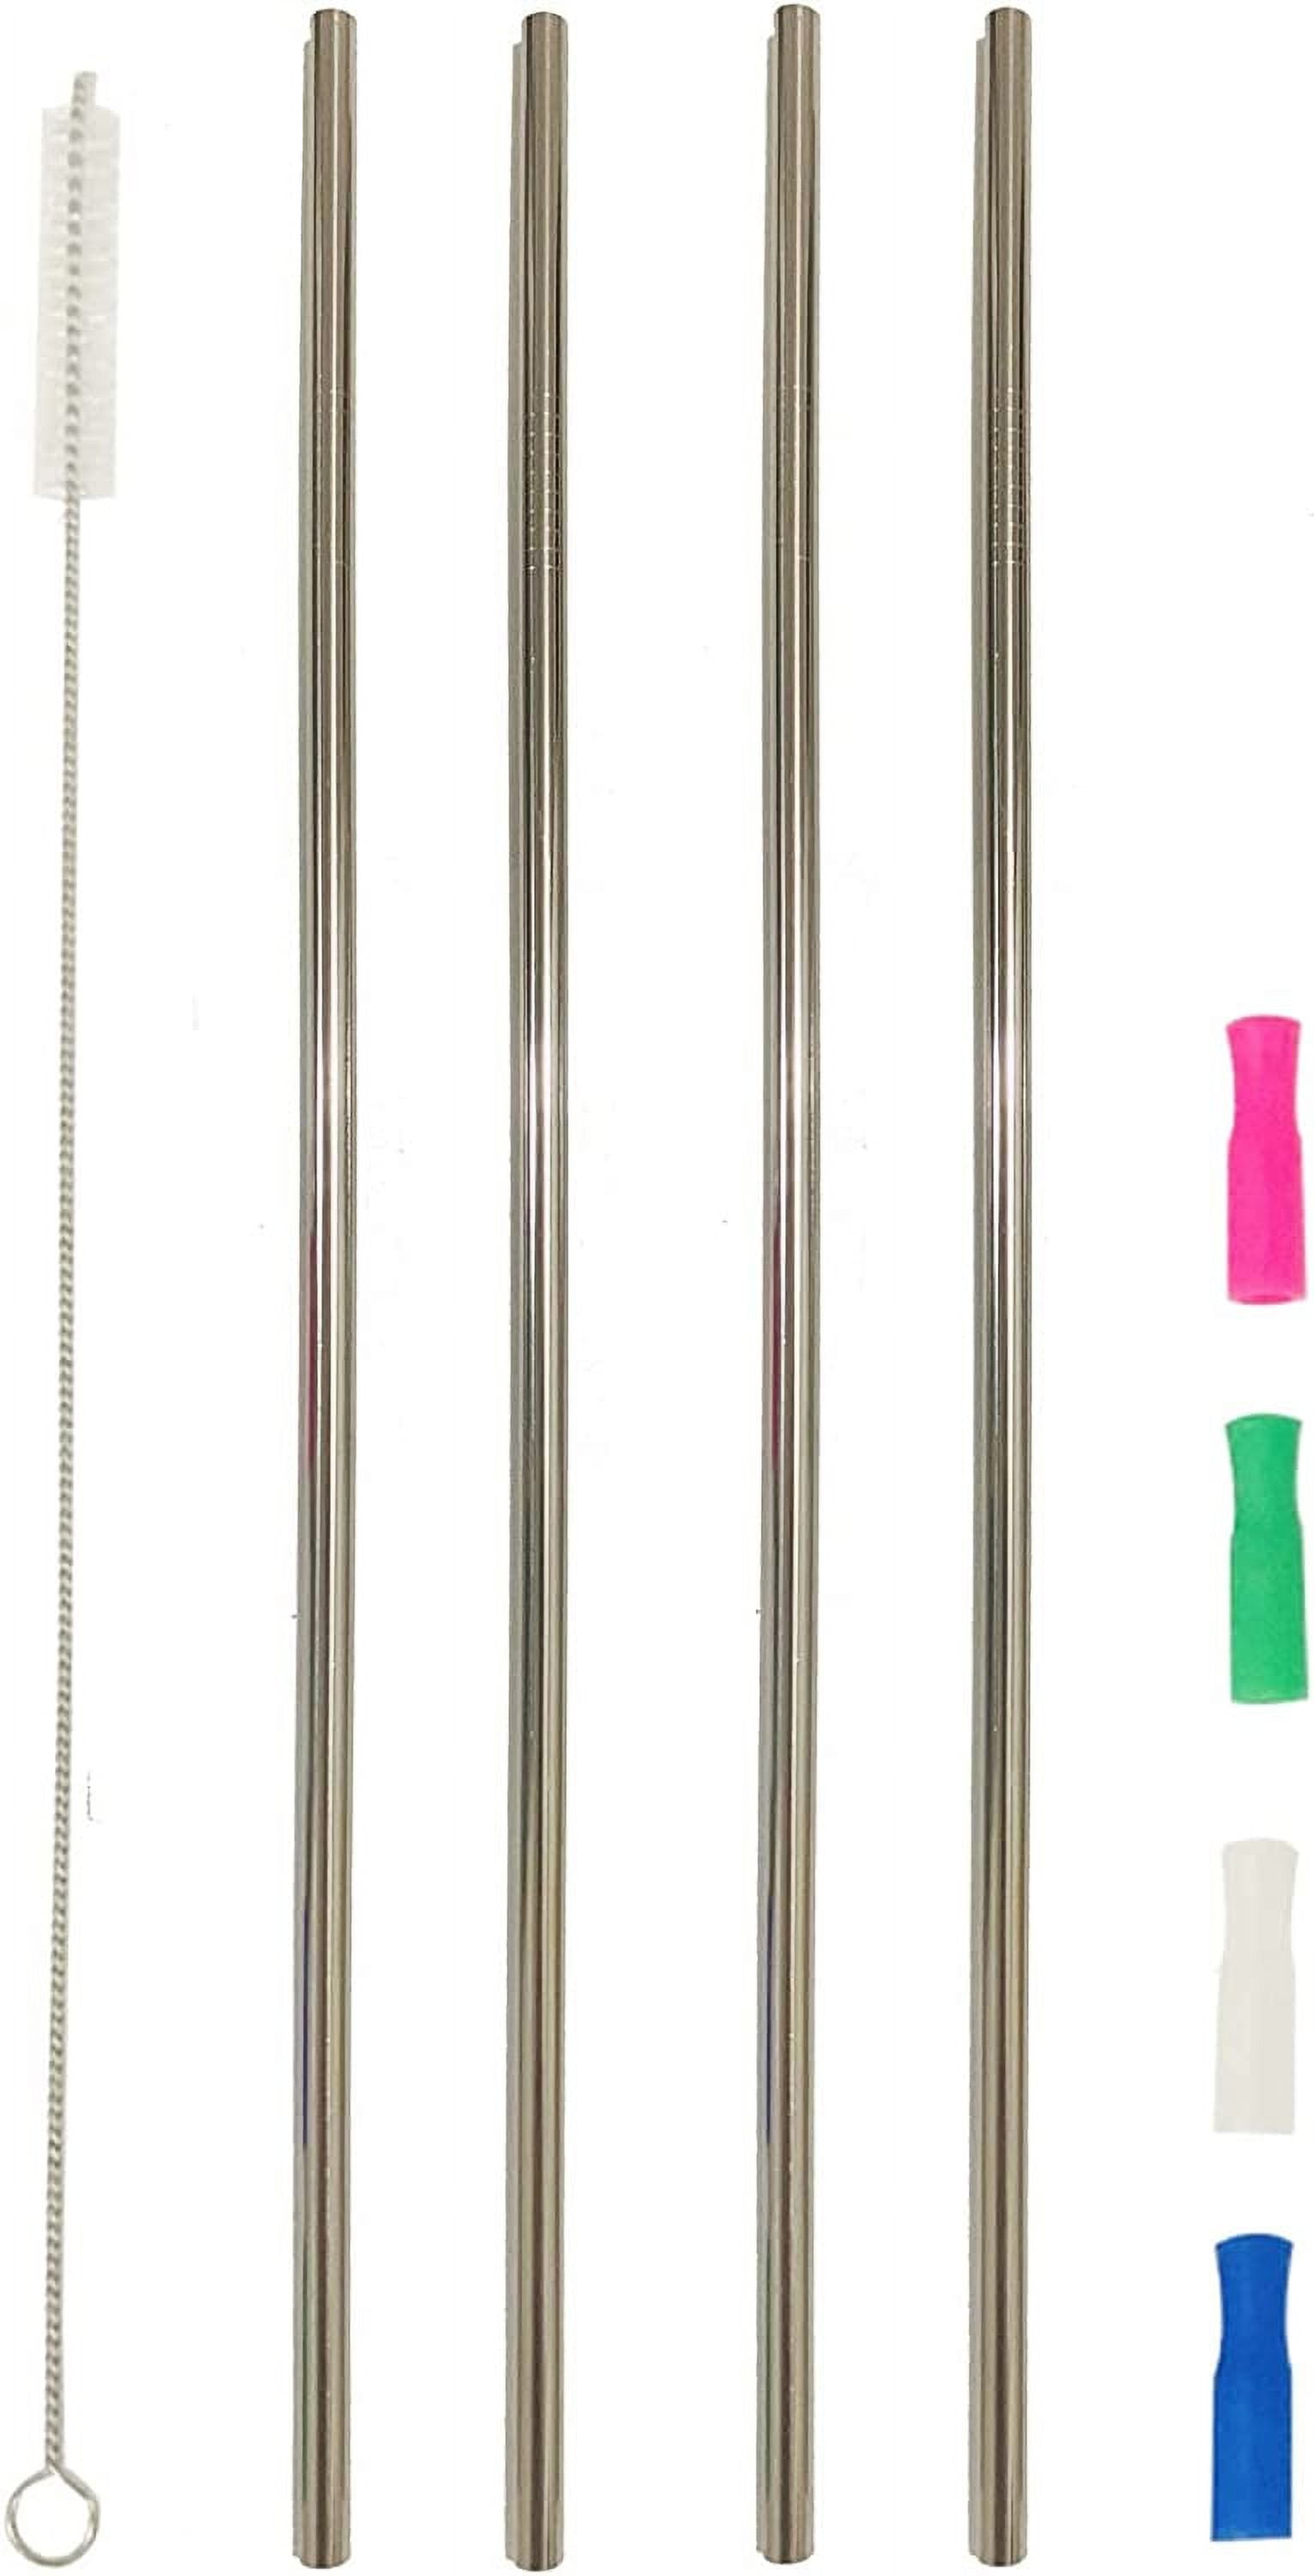 12 Metal Straws, 4pcs Ultra Long 0.24 Diameter Reusable Straight  Stainless Steel Drinking Straws with Silicone Tips and Cleaning Brush for  Tall Cups